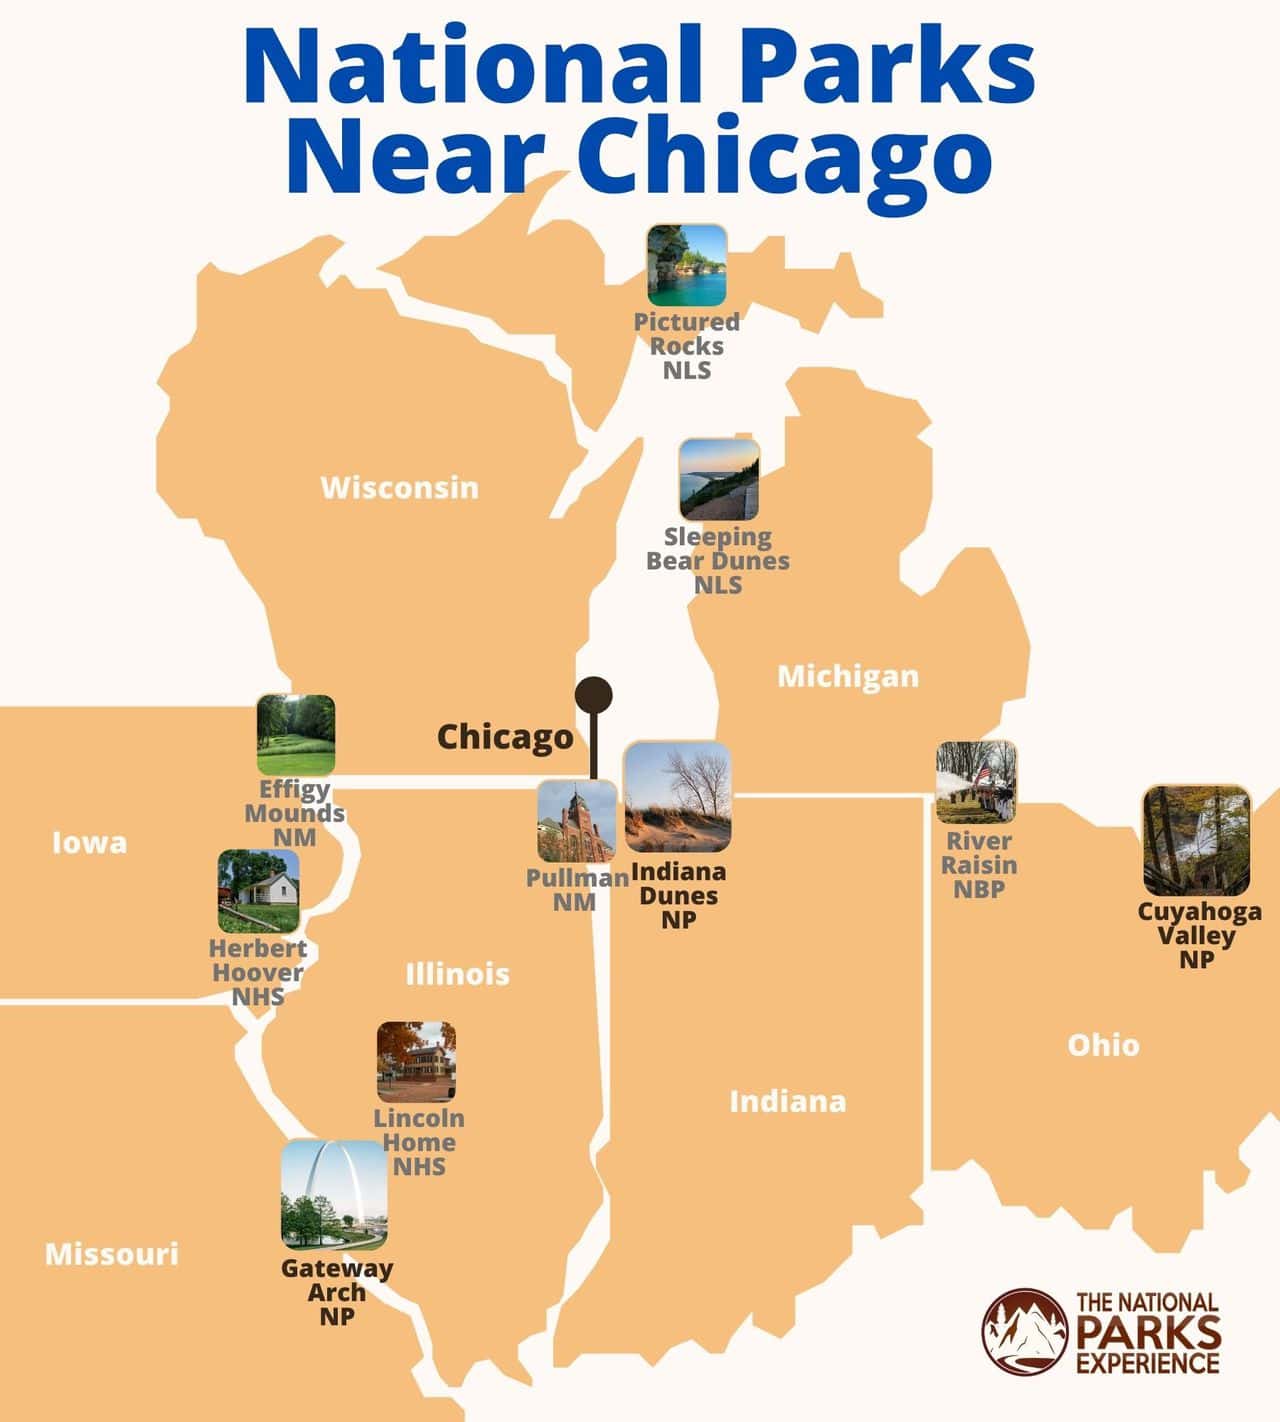 National Parks Near Chicago Map